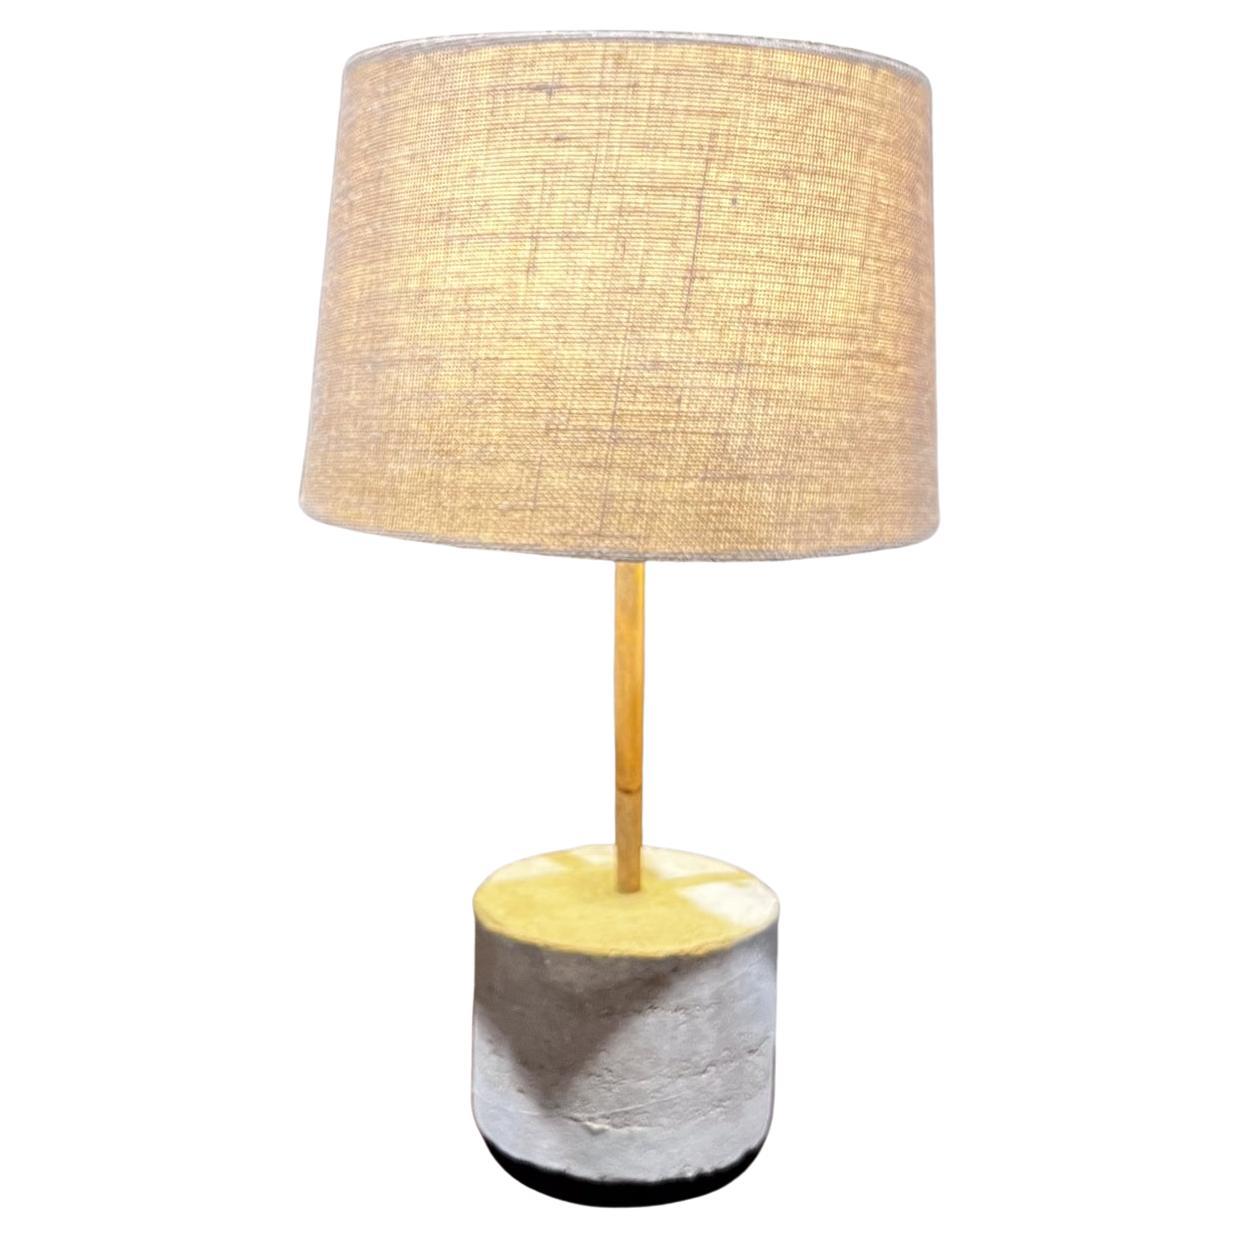 Contemporary Table Lamp Rammed Earth Bamboo Pablo Romo design
Round rammed earth with bamboo
8 diameter x 20.5 tall
Original Vintage condition. No shade is included.
Review all images.
